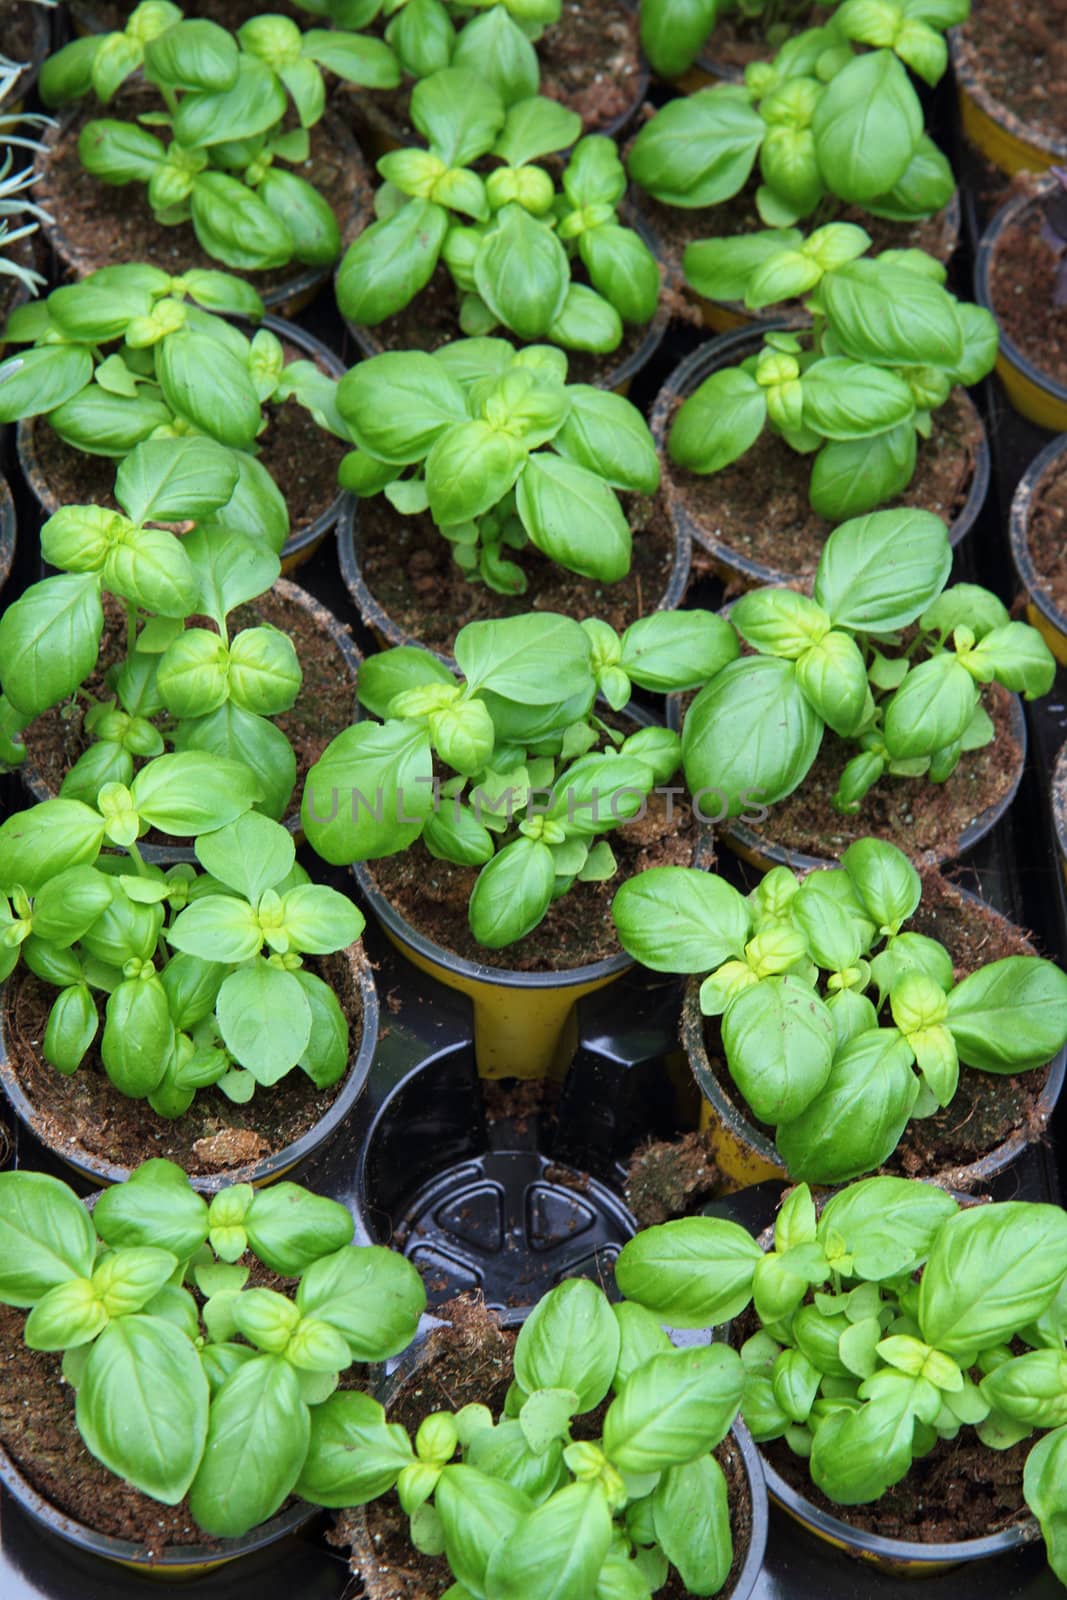 sweet small basil plants as nice agriculture background